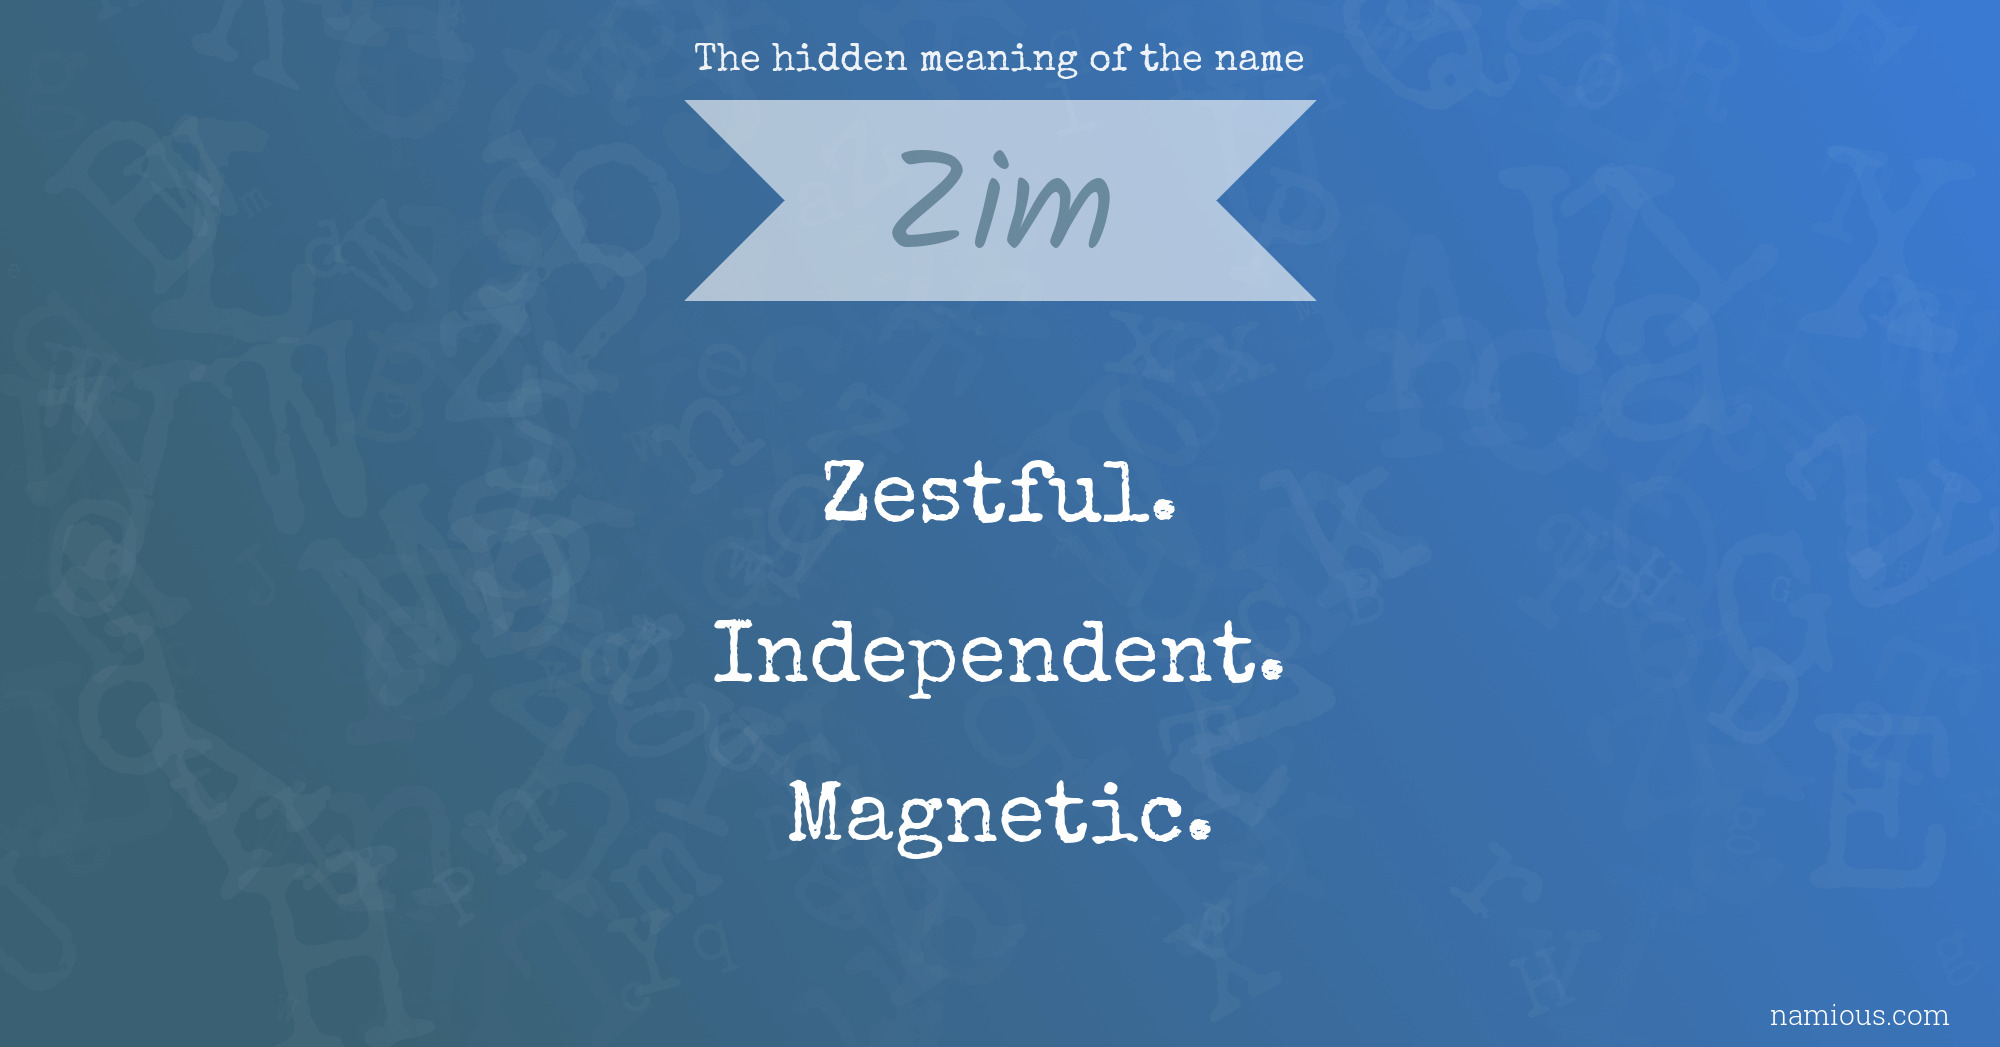 The hidden meaning of the name Zim